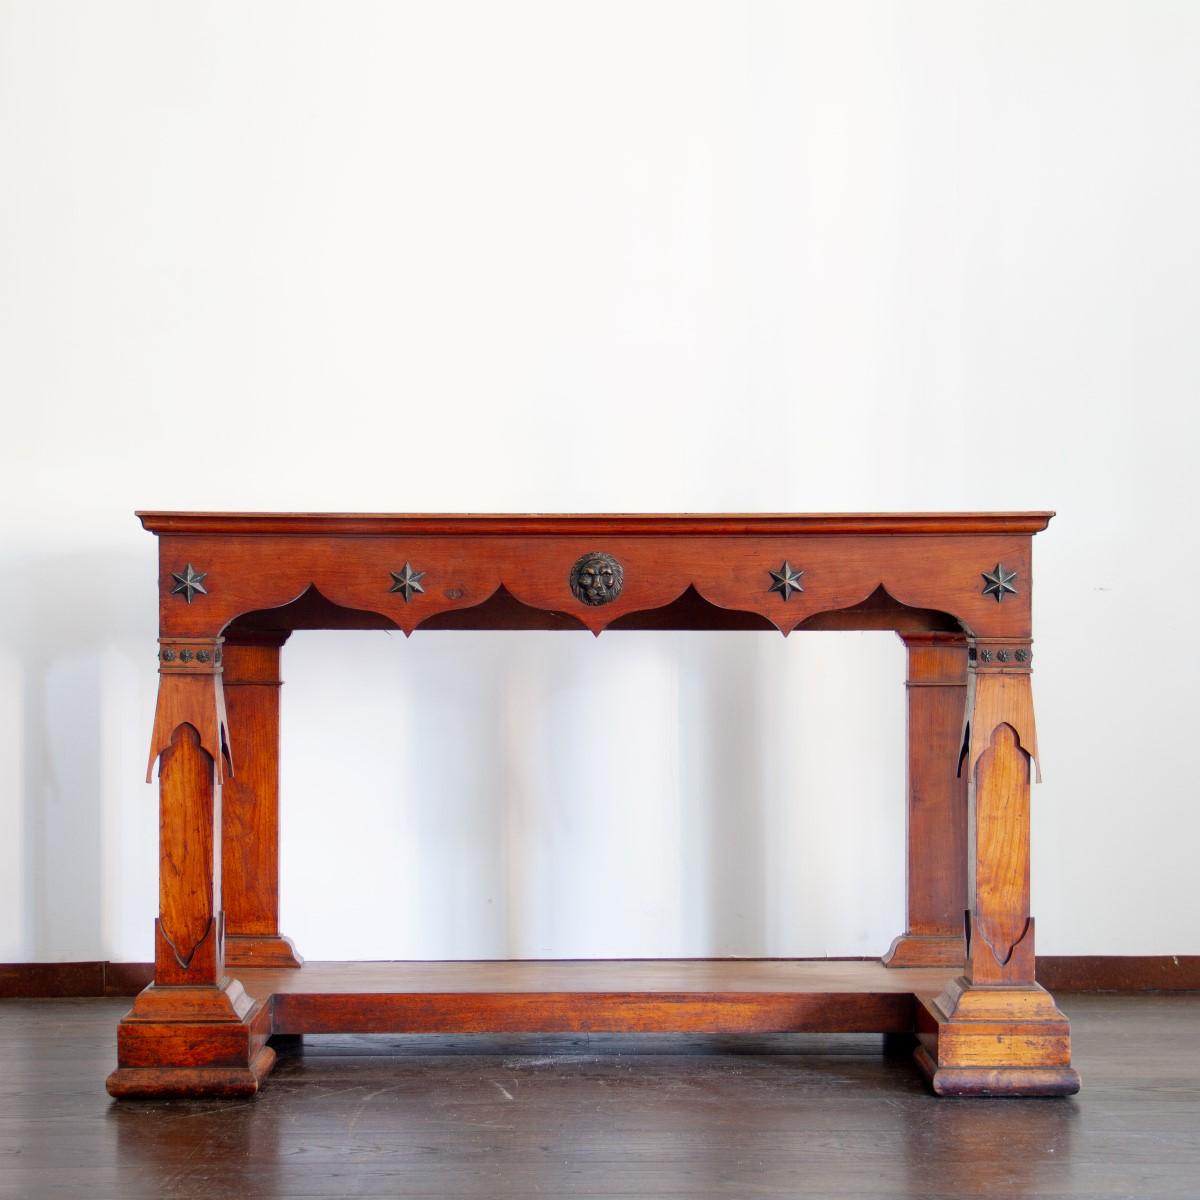 A rare pair of large classical and sophisticated fruitwood console tables from the Baltics with an unusual combination of both neoclassical and NeoGothic influence. Each console has an original inset white marble tops and the fruitwood is adorned